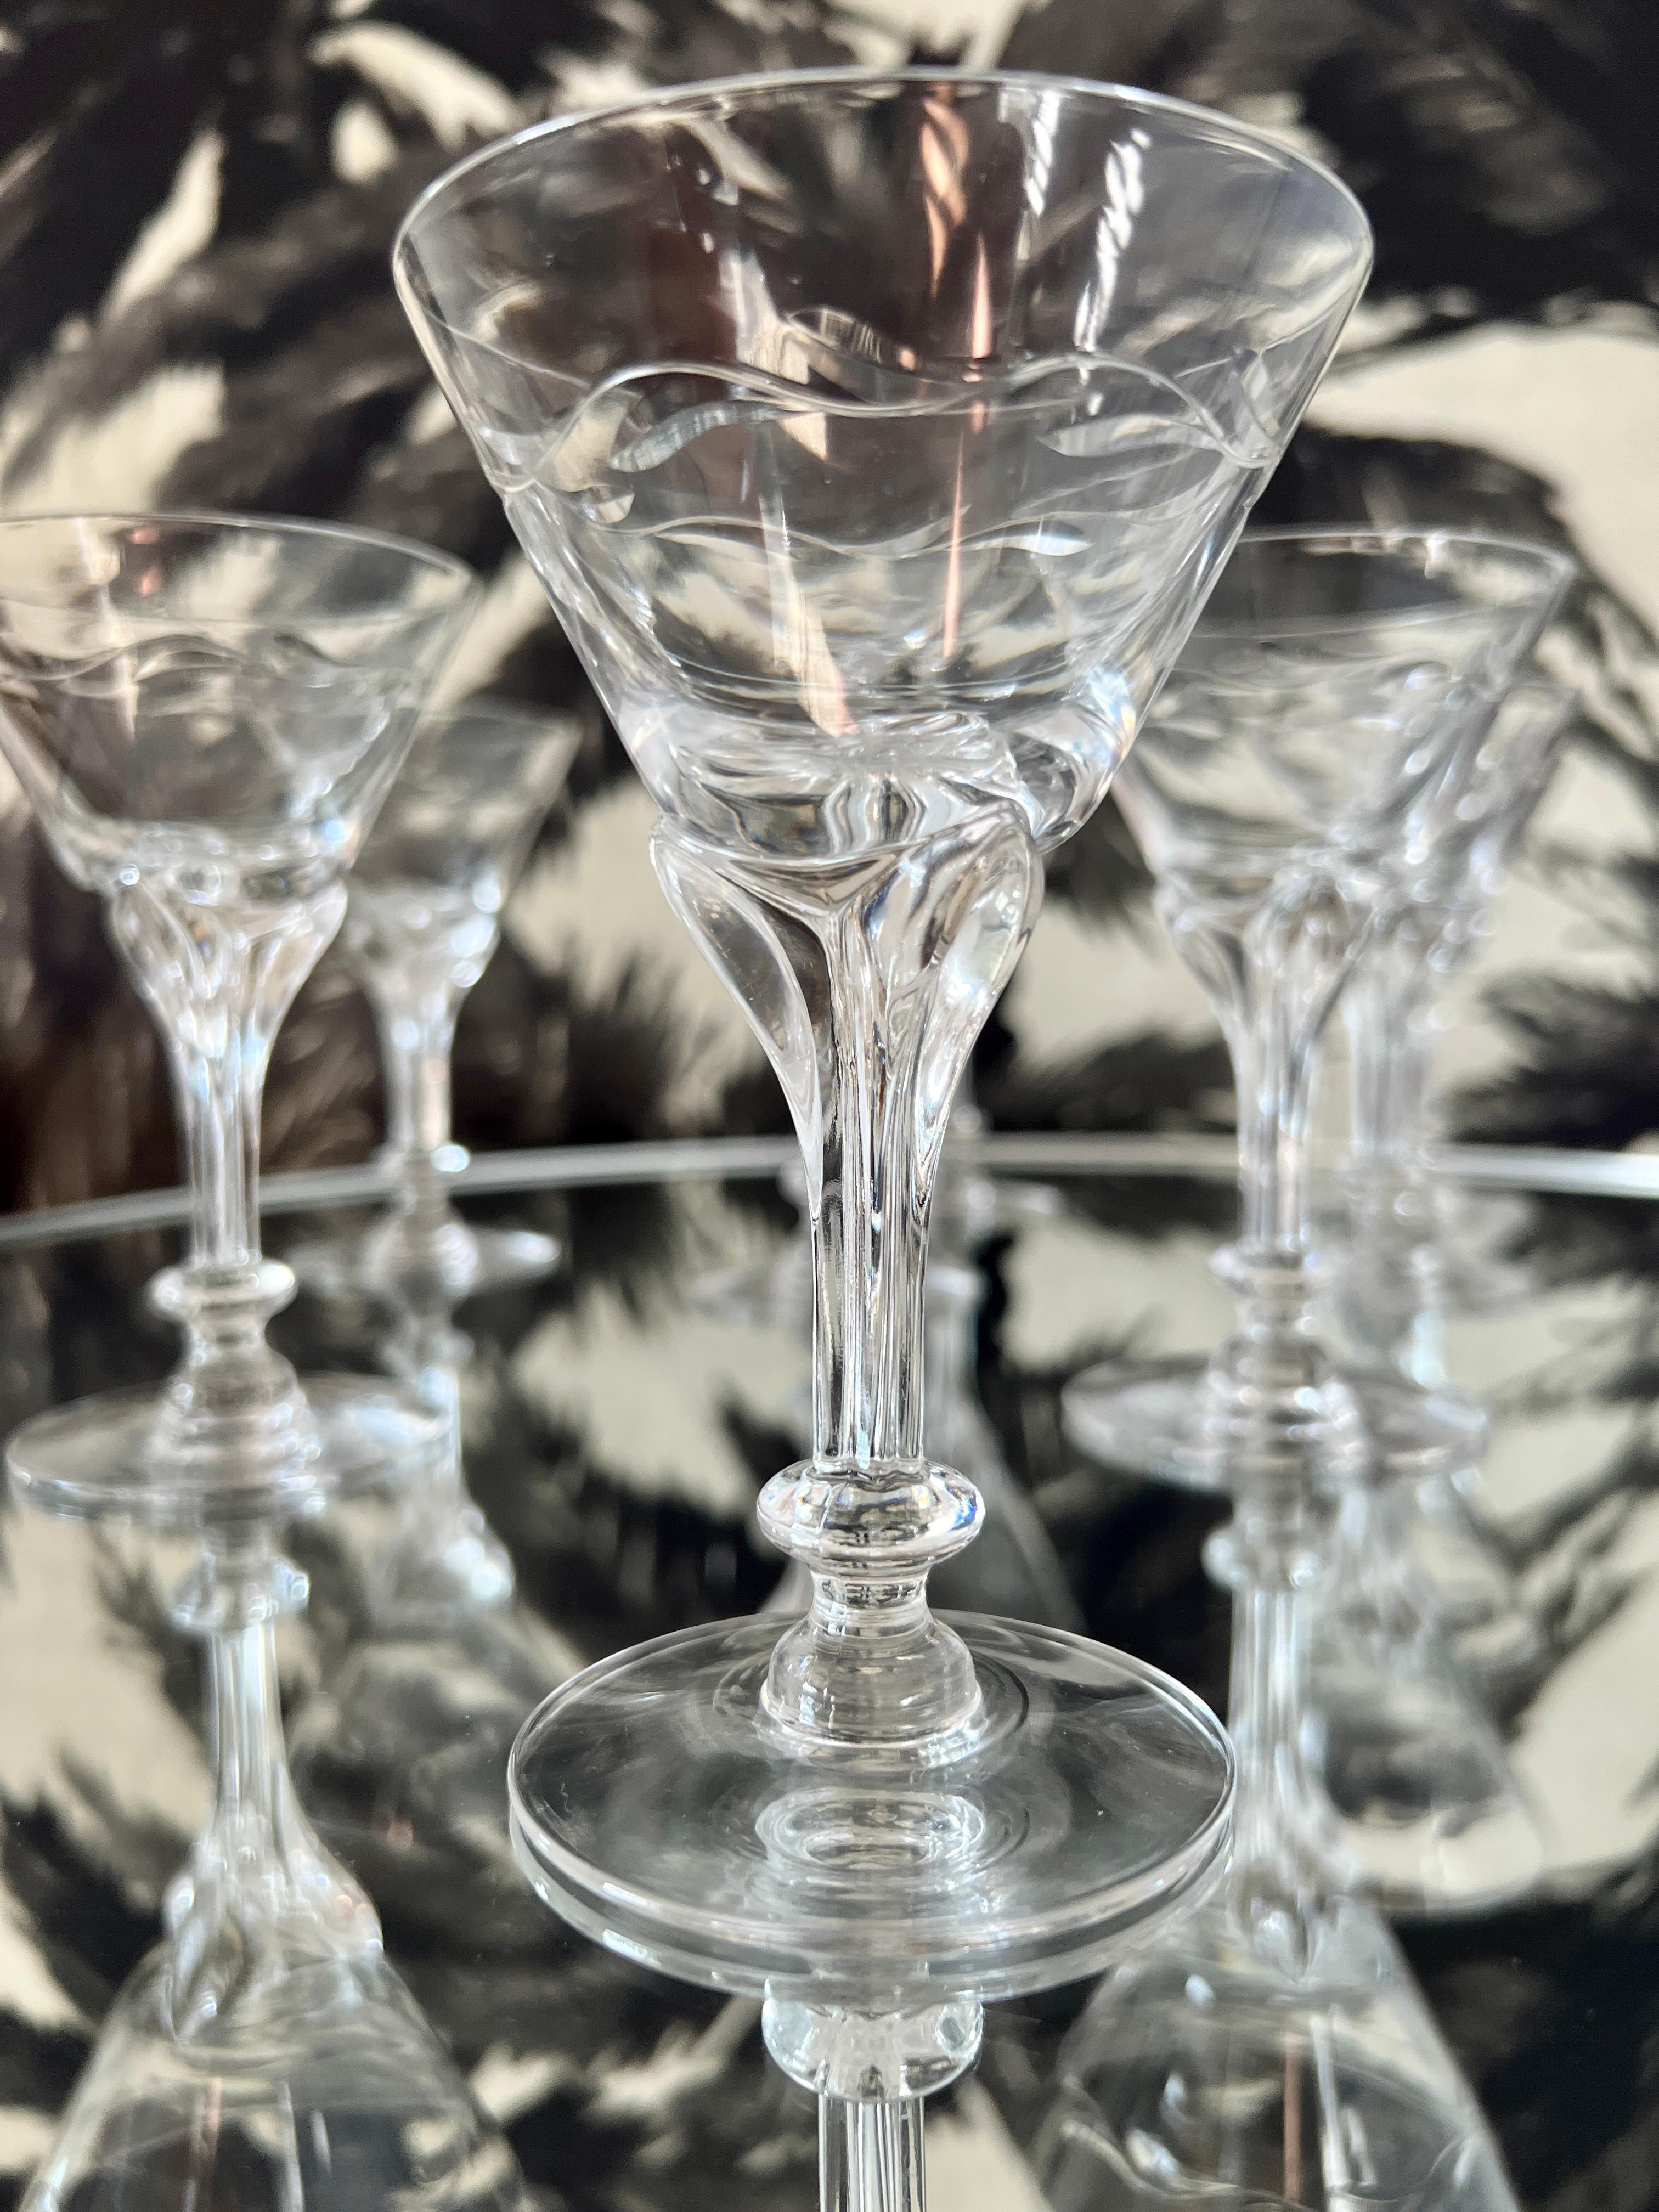 Mid-20th Century Art Nouveau Crystal Cocktail Glasses by Tiffin Glass, Set of Twelve, c. 1950s For Sale